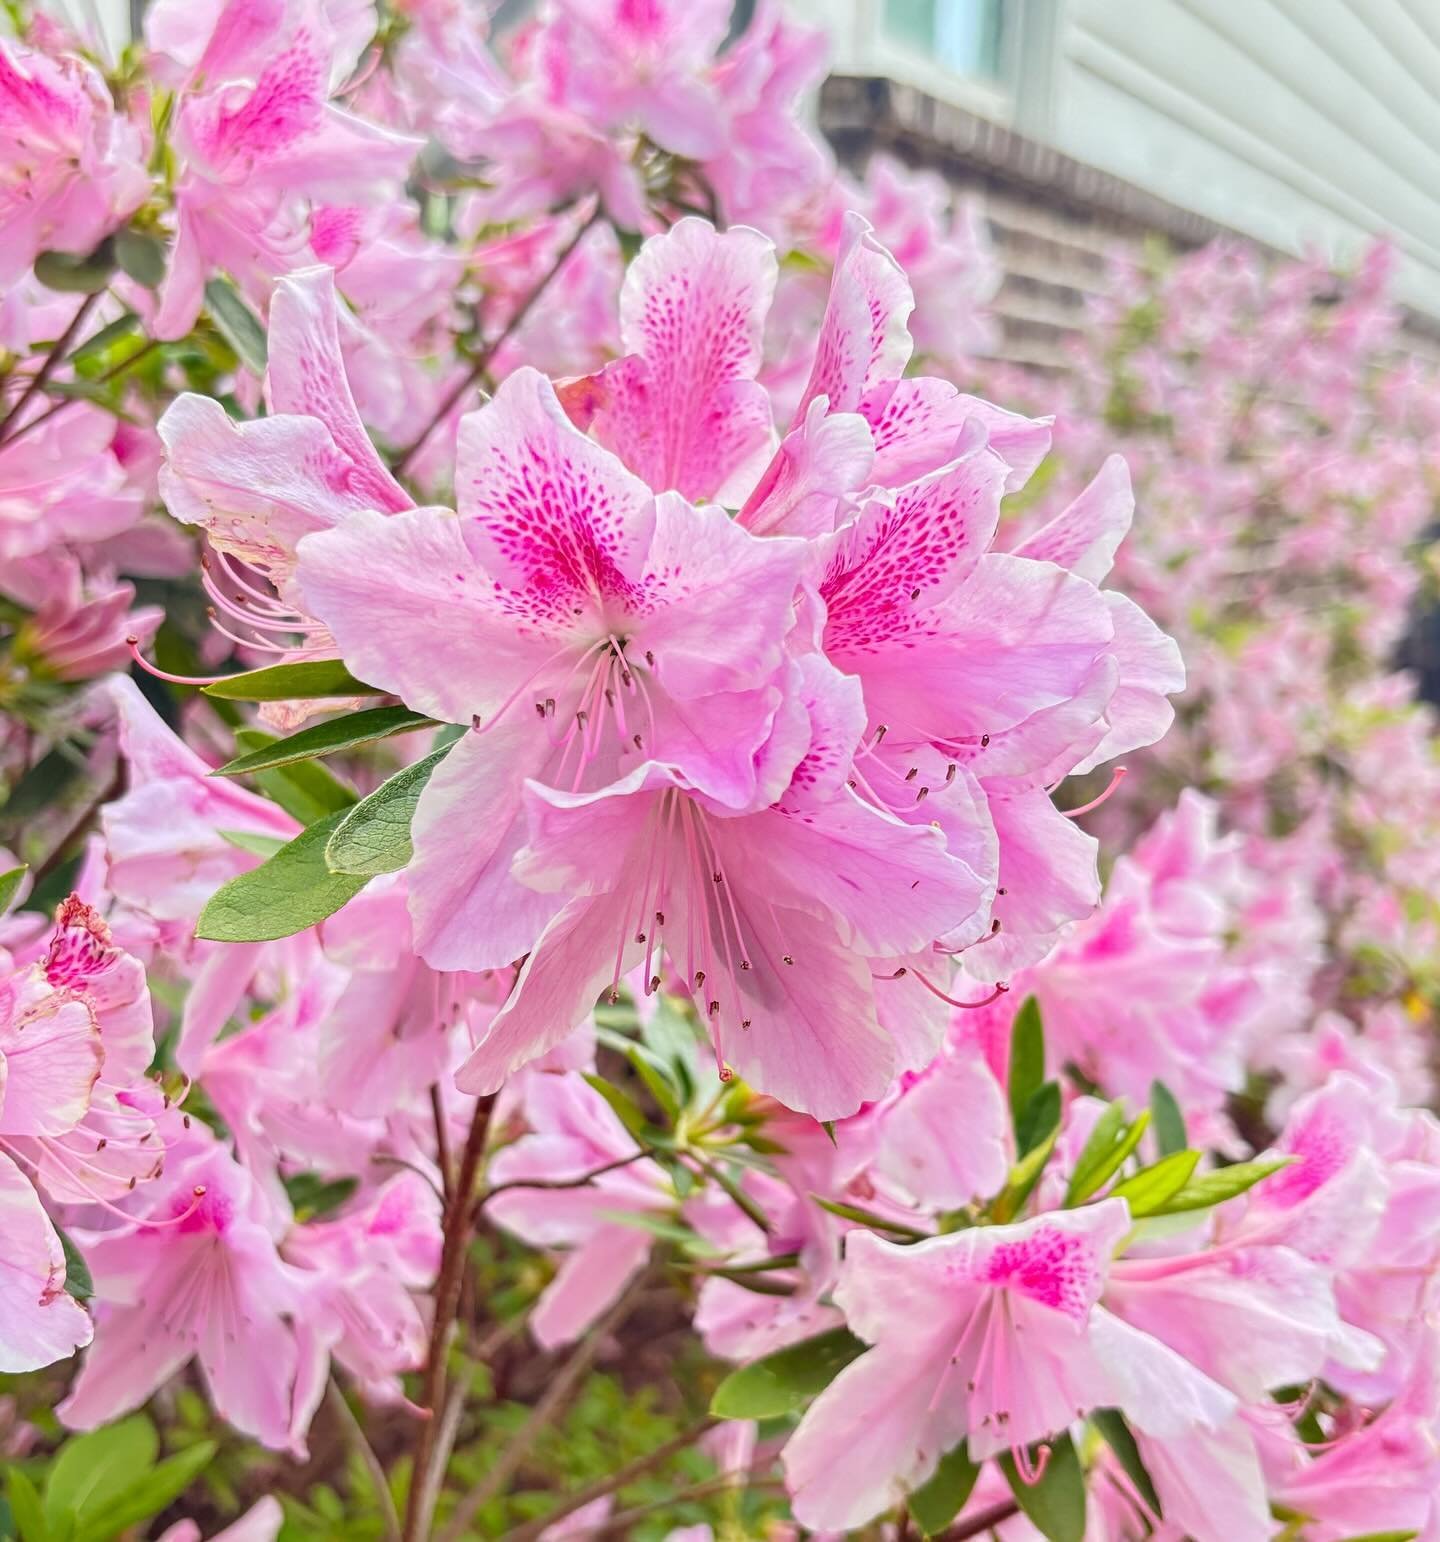 It&rsquo;s Master&rsquo;s Sunday and I&rsquo;m this phone shot of the azaleas from our yard as a permanent placeholder because we finally got to experience Augusta National for the Women&rsquo;s Amateur and all we have to show for it is an obscene am